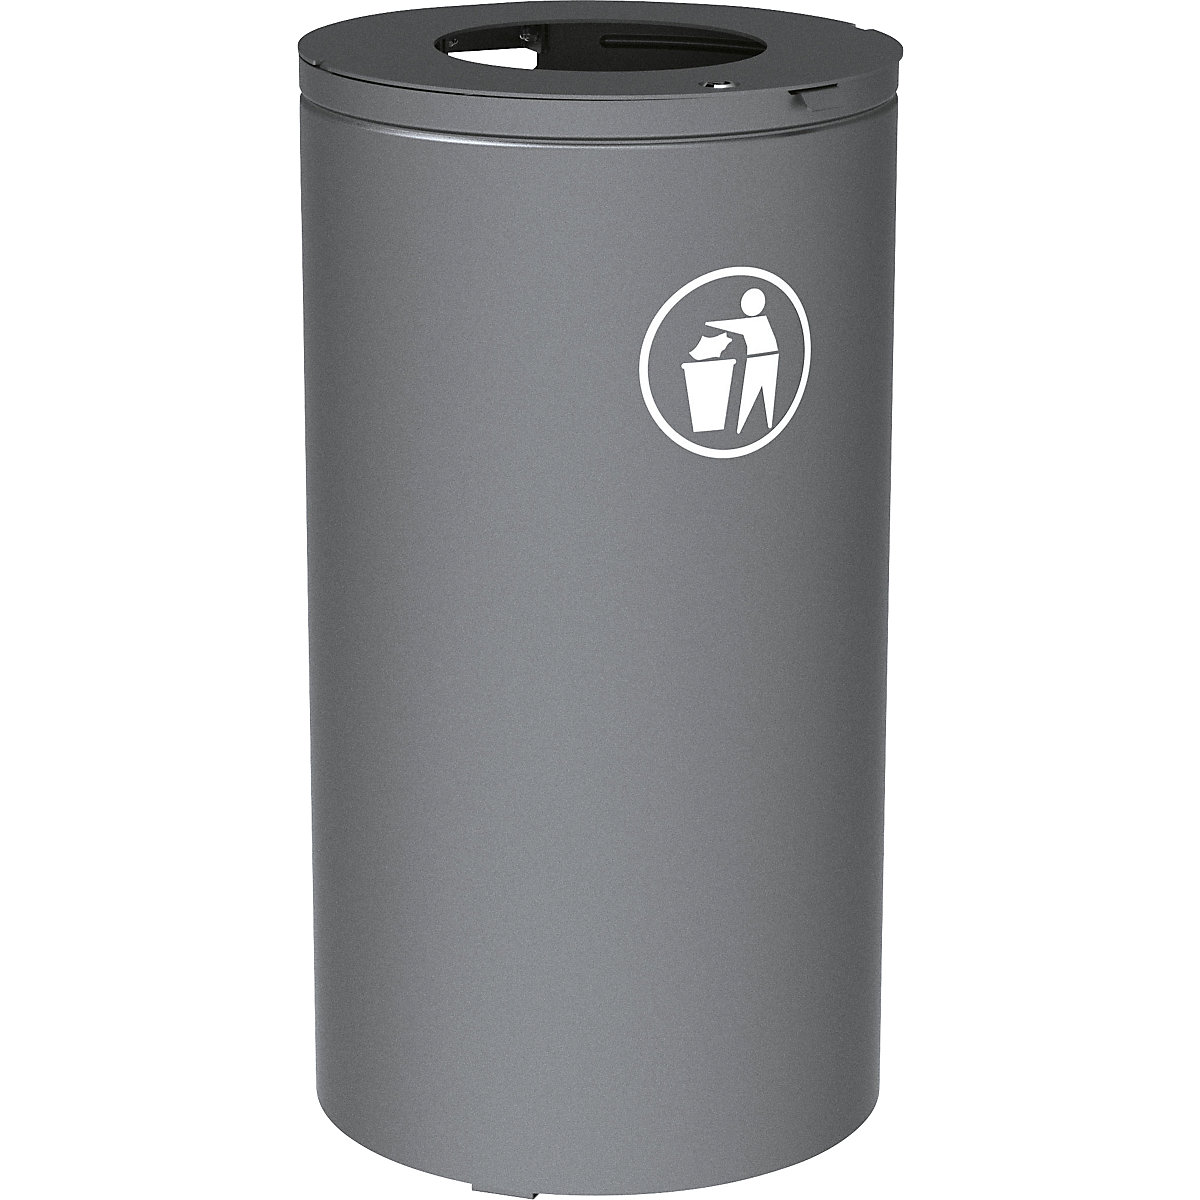 OLBIA outdoor waste collector - PROCITY